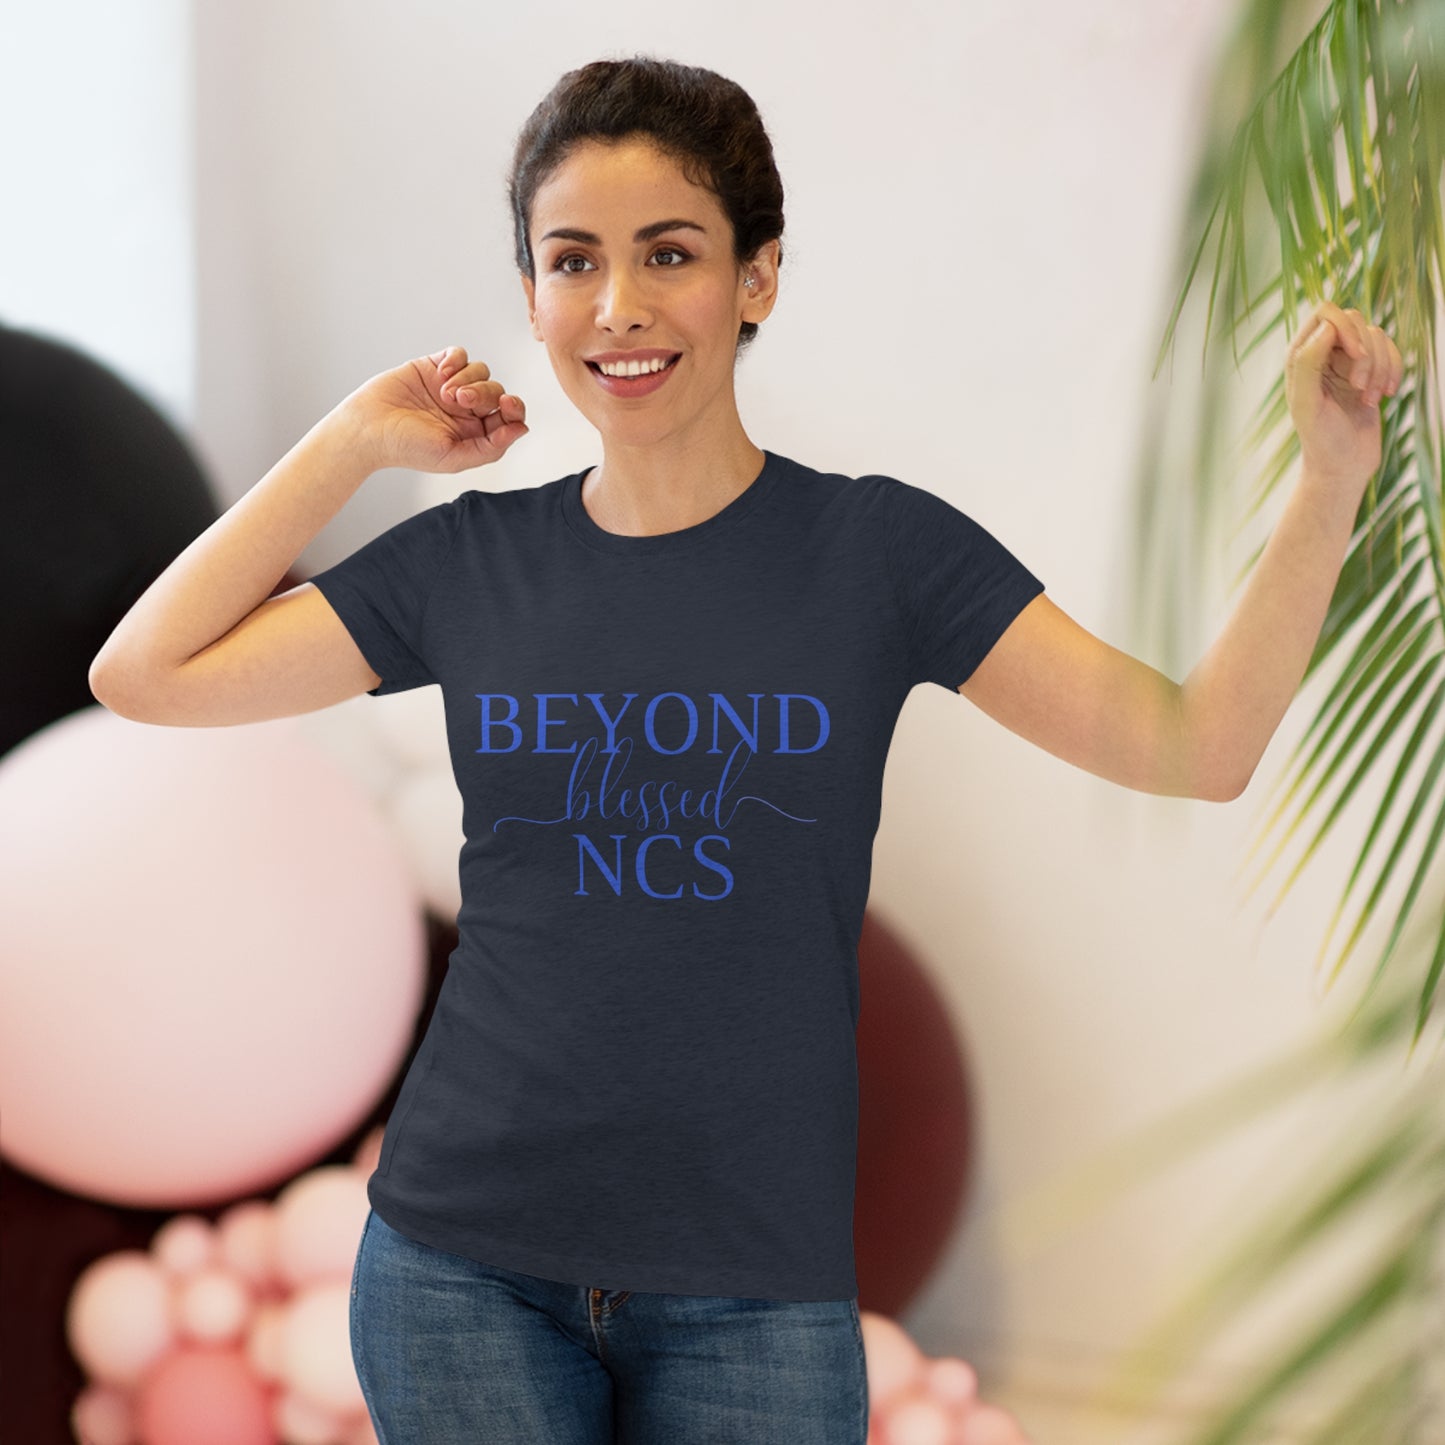 Beyond Blessed NCS - Women's Triblend Tee - Royal Blue